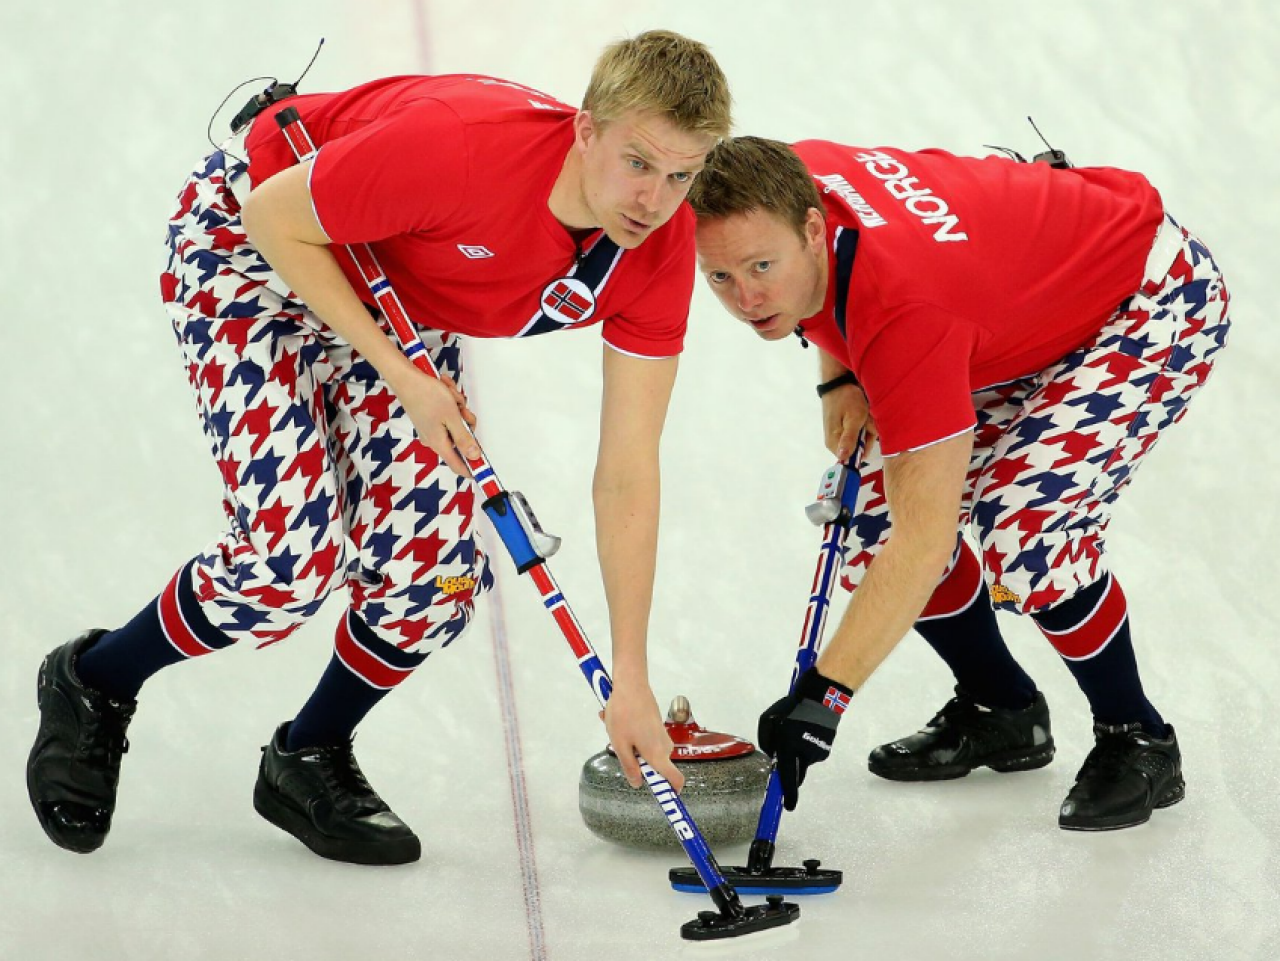 Fall head over heels for the Norwegian curling team's Valentine's